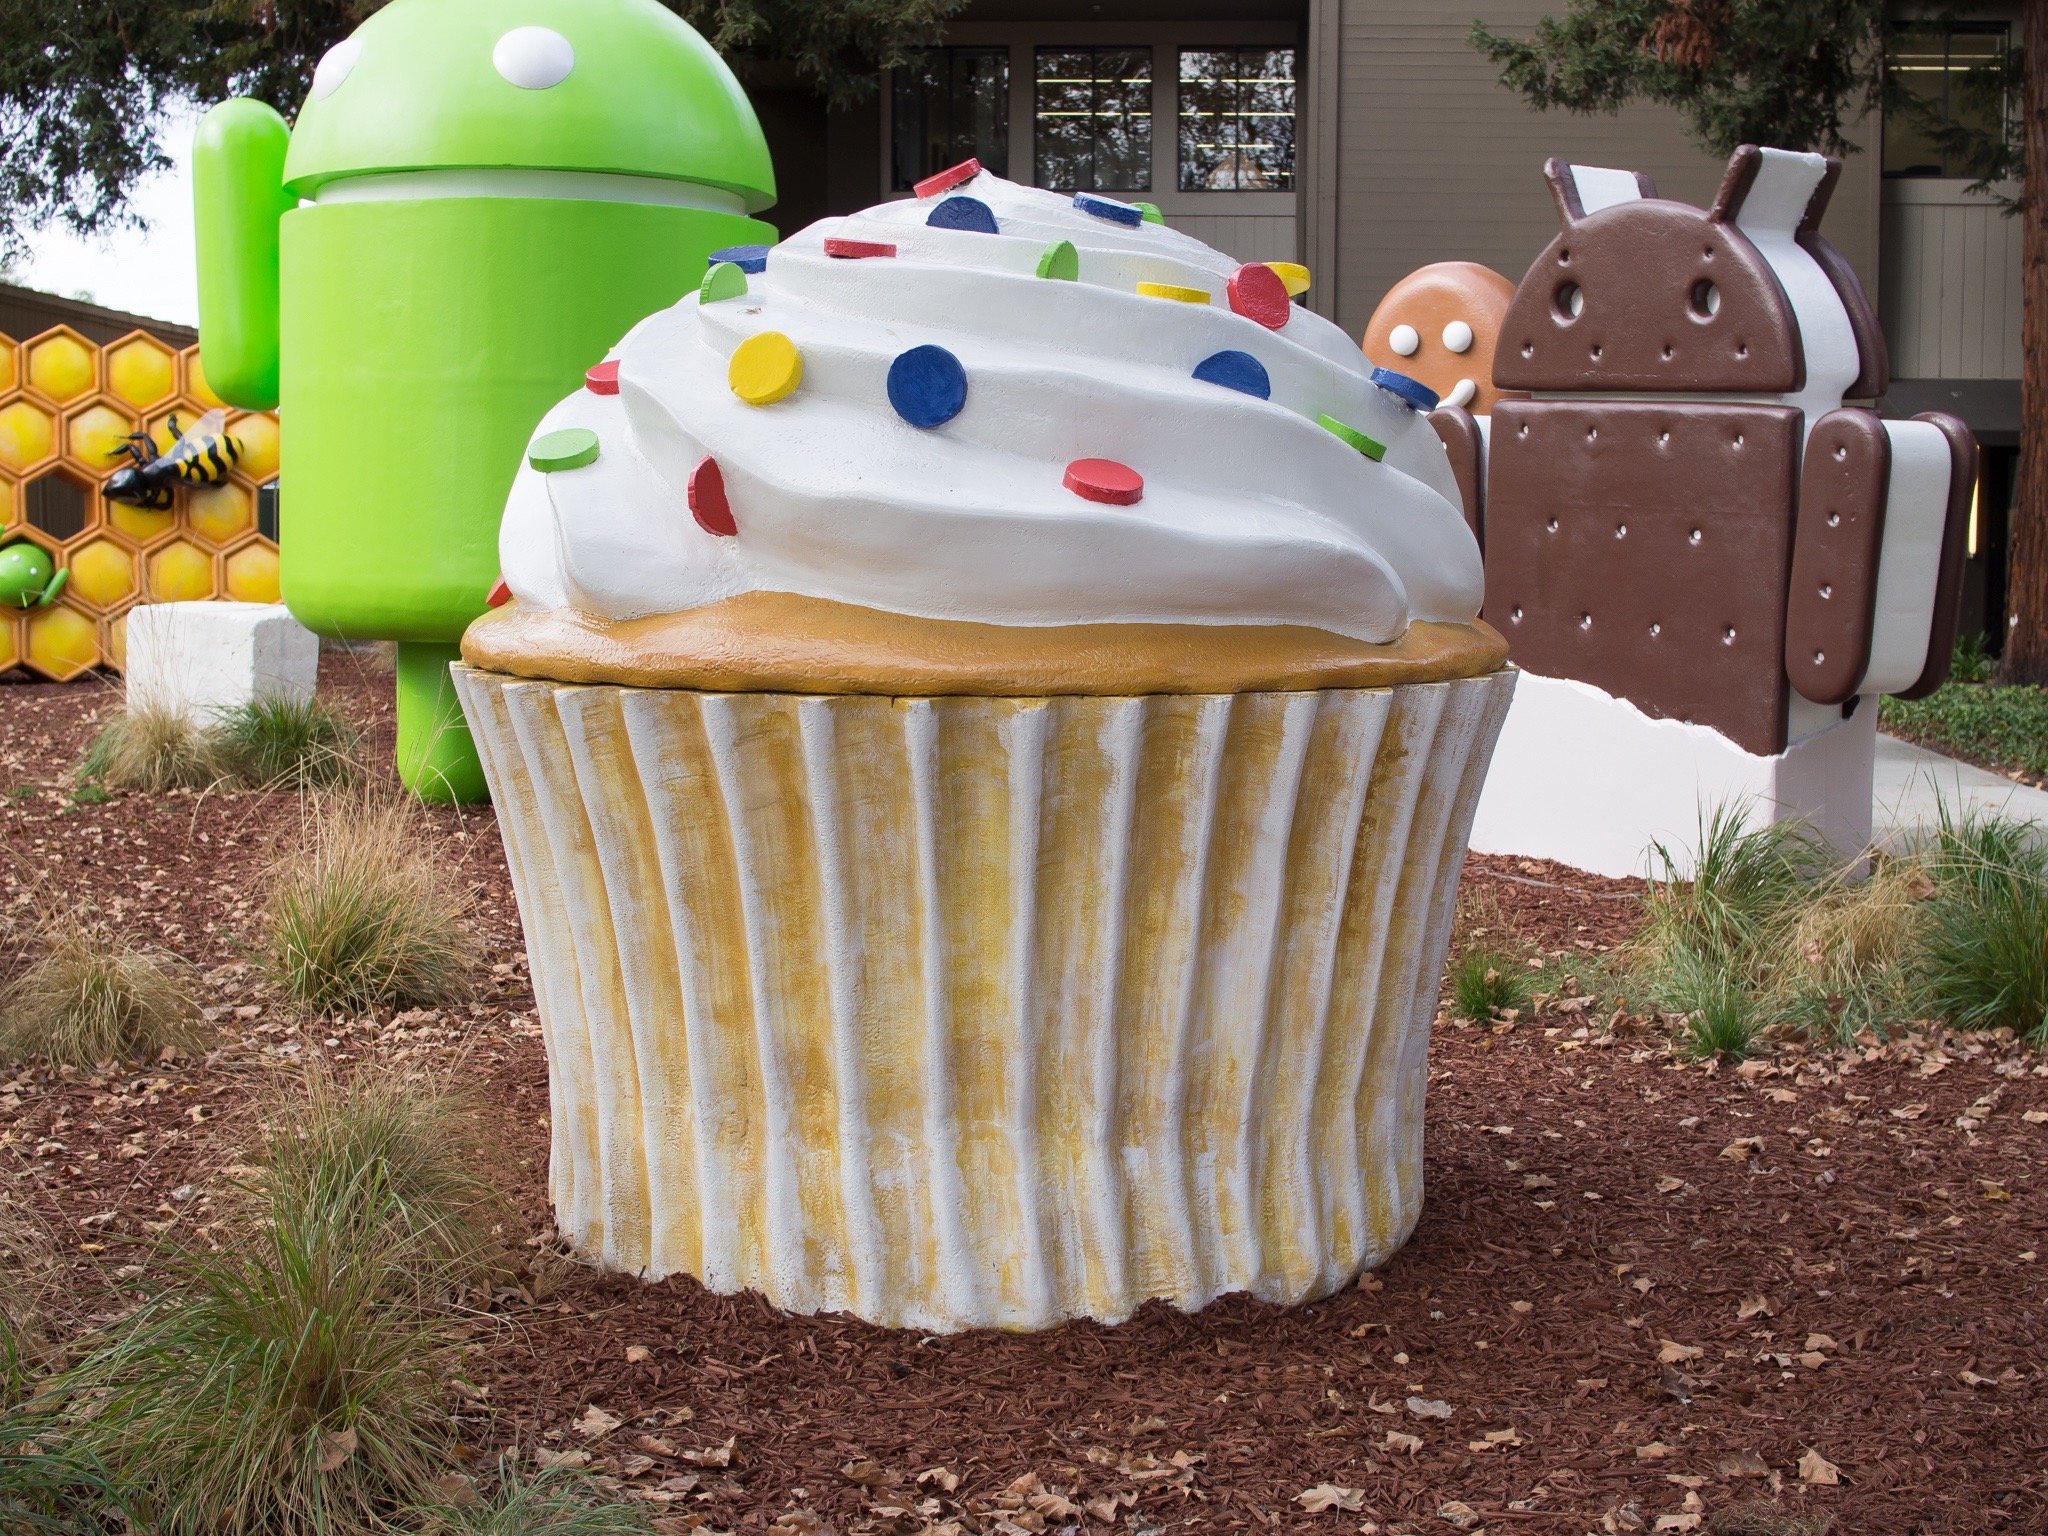 Android Cupcake statue